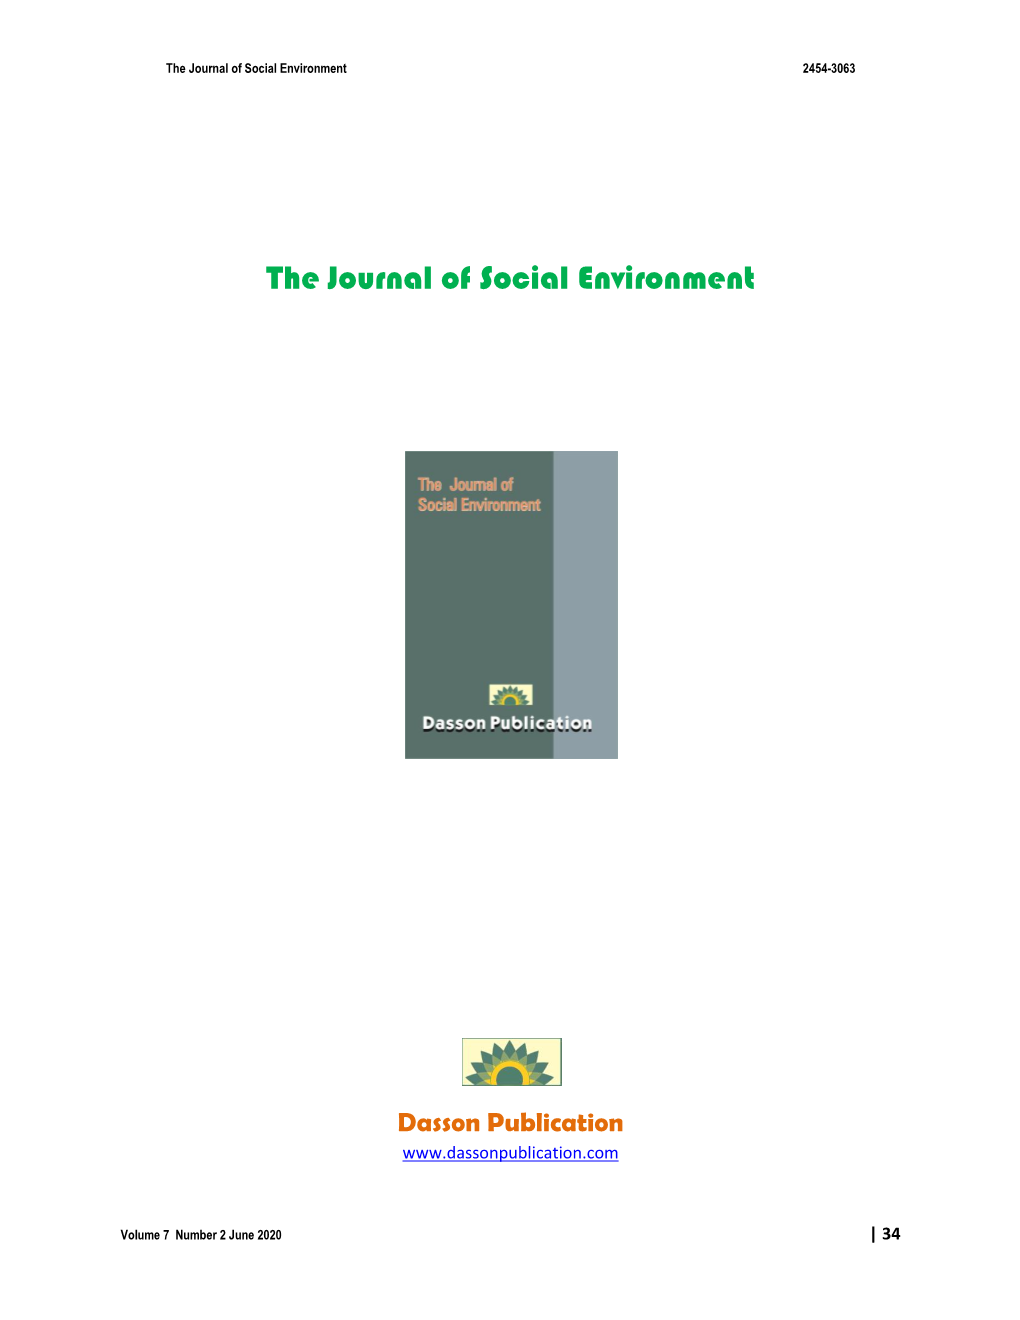 The Journal of Social Environment 2454-3063